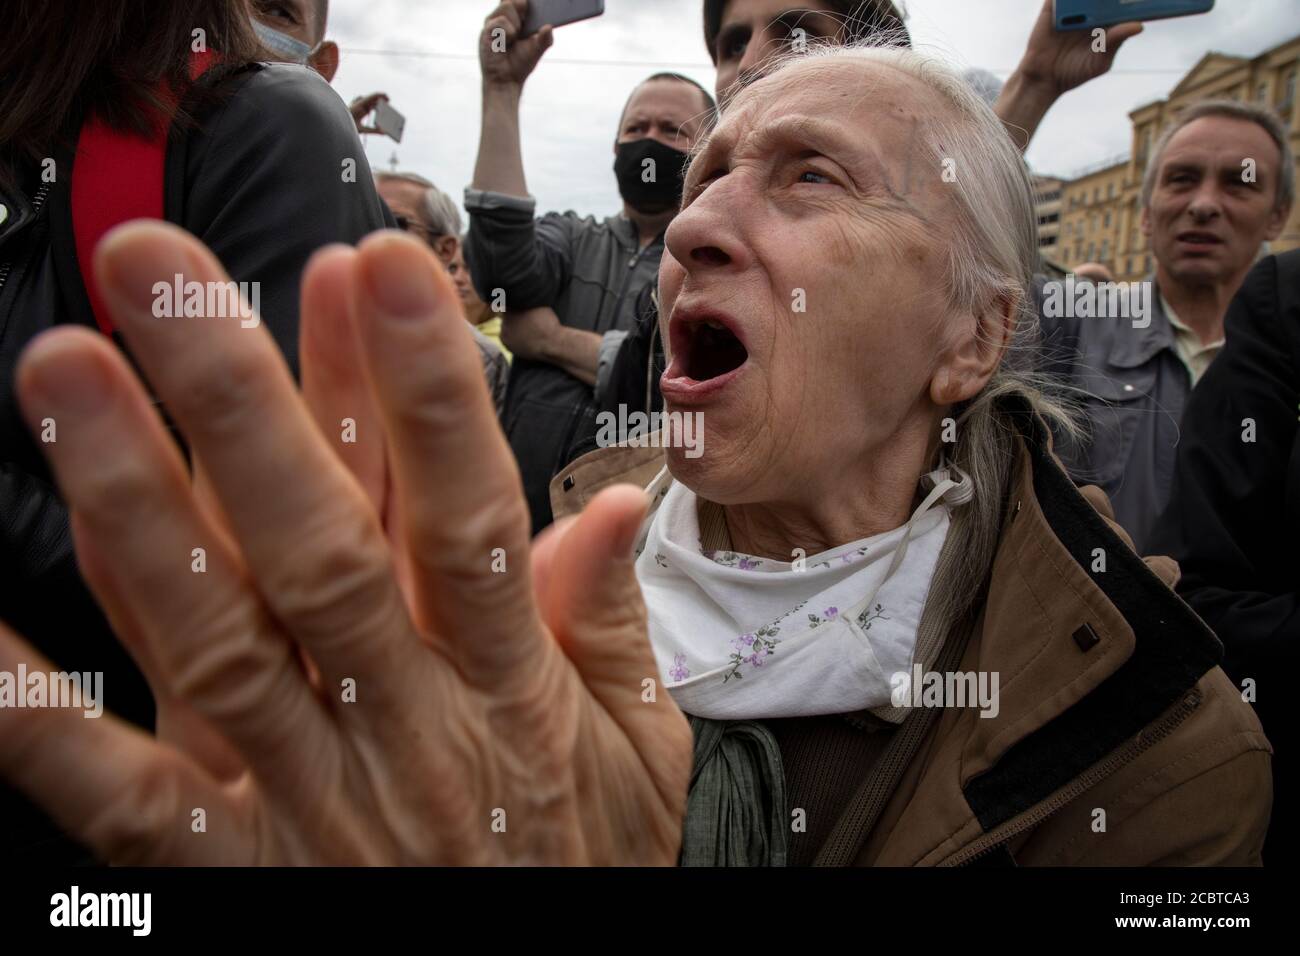 Moscow, Russia. 15th of August, 2020 Old woman takes part in a political rally in support of protesters in Khabarovsk Russian region and Belarus, at Pushkin square in central Moscow, Russia. Blogger Valery Solovei called Russian citizens walk on central street of Russian cities and feed the pigeons with the Civil Solidarity with Belarus and Khabarovsk political protests, in all cities of Russia on Saturday. 15th of August Stock Photo